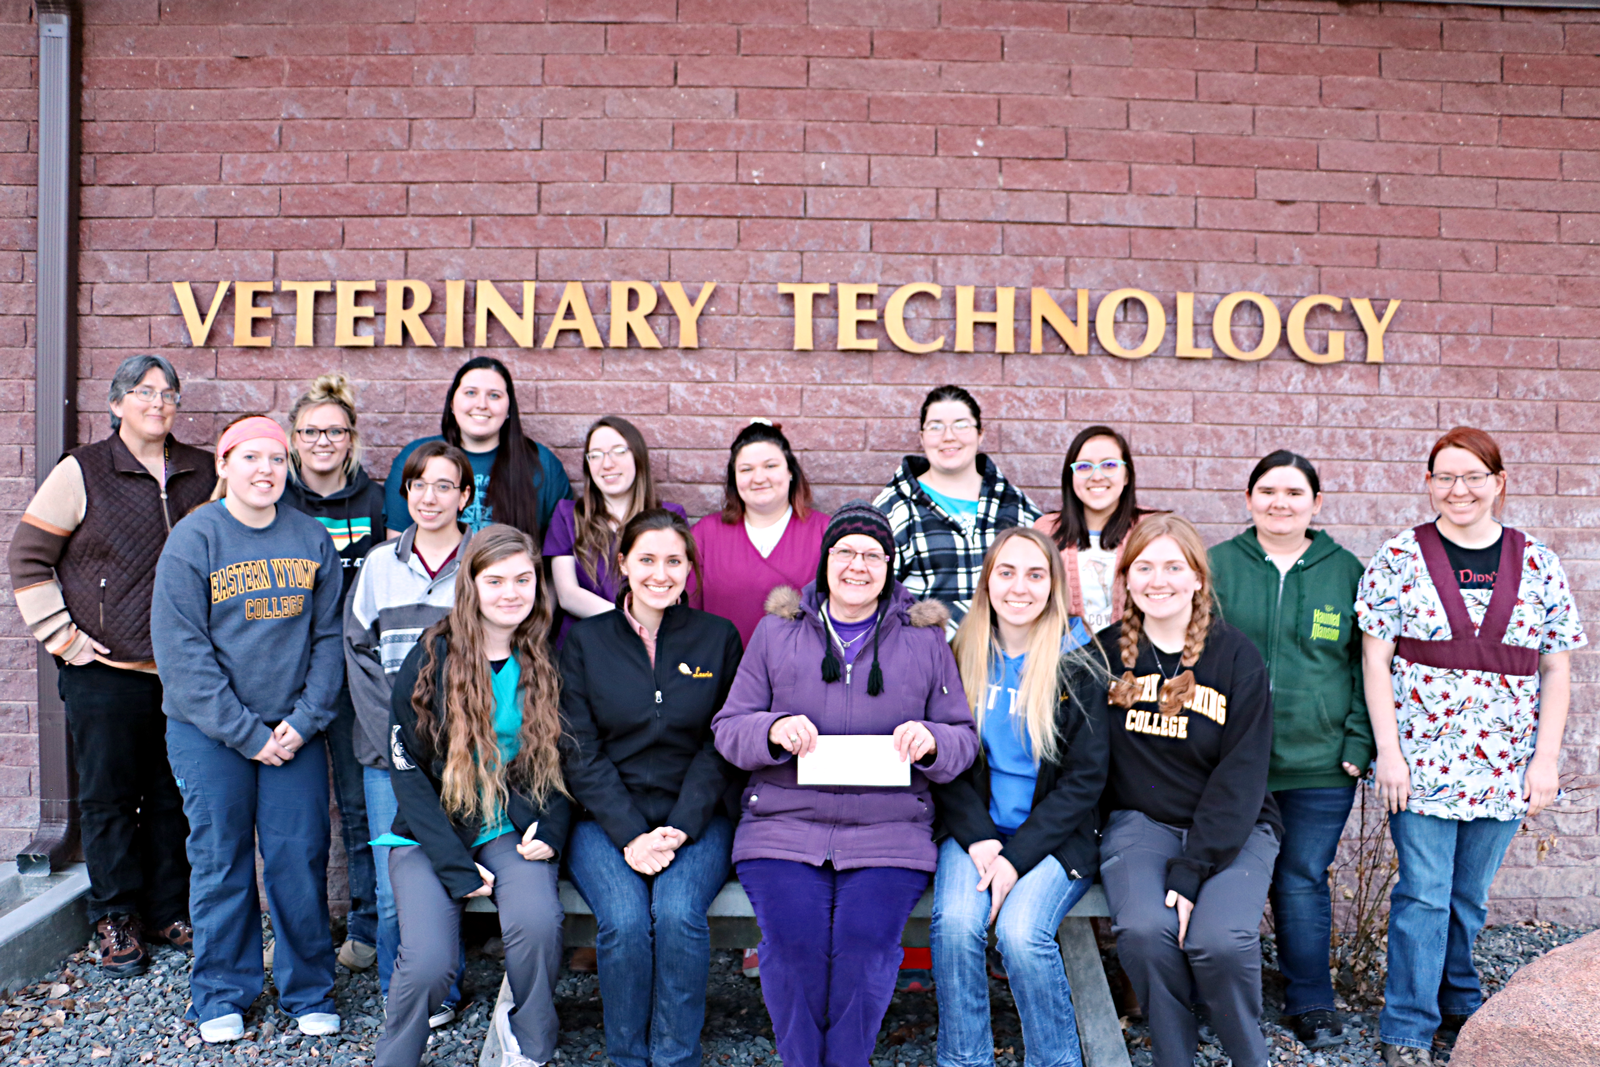 Eastern Wyoming College Vet Tech Club students held a quilt raffle on the Torrington Campus during December. The quilt was donated by EWC’s President, Dr. Lesley Travers. The club raised $164. The club donated the money raised to the Goshen County Task Force on Family Violence.